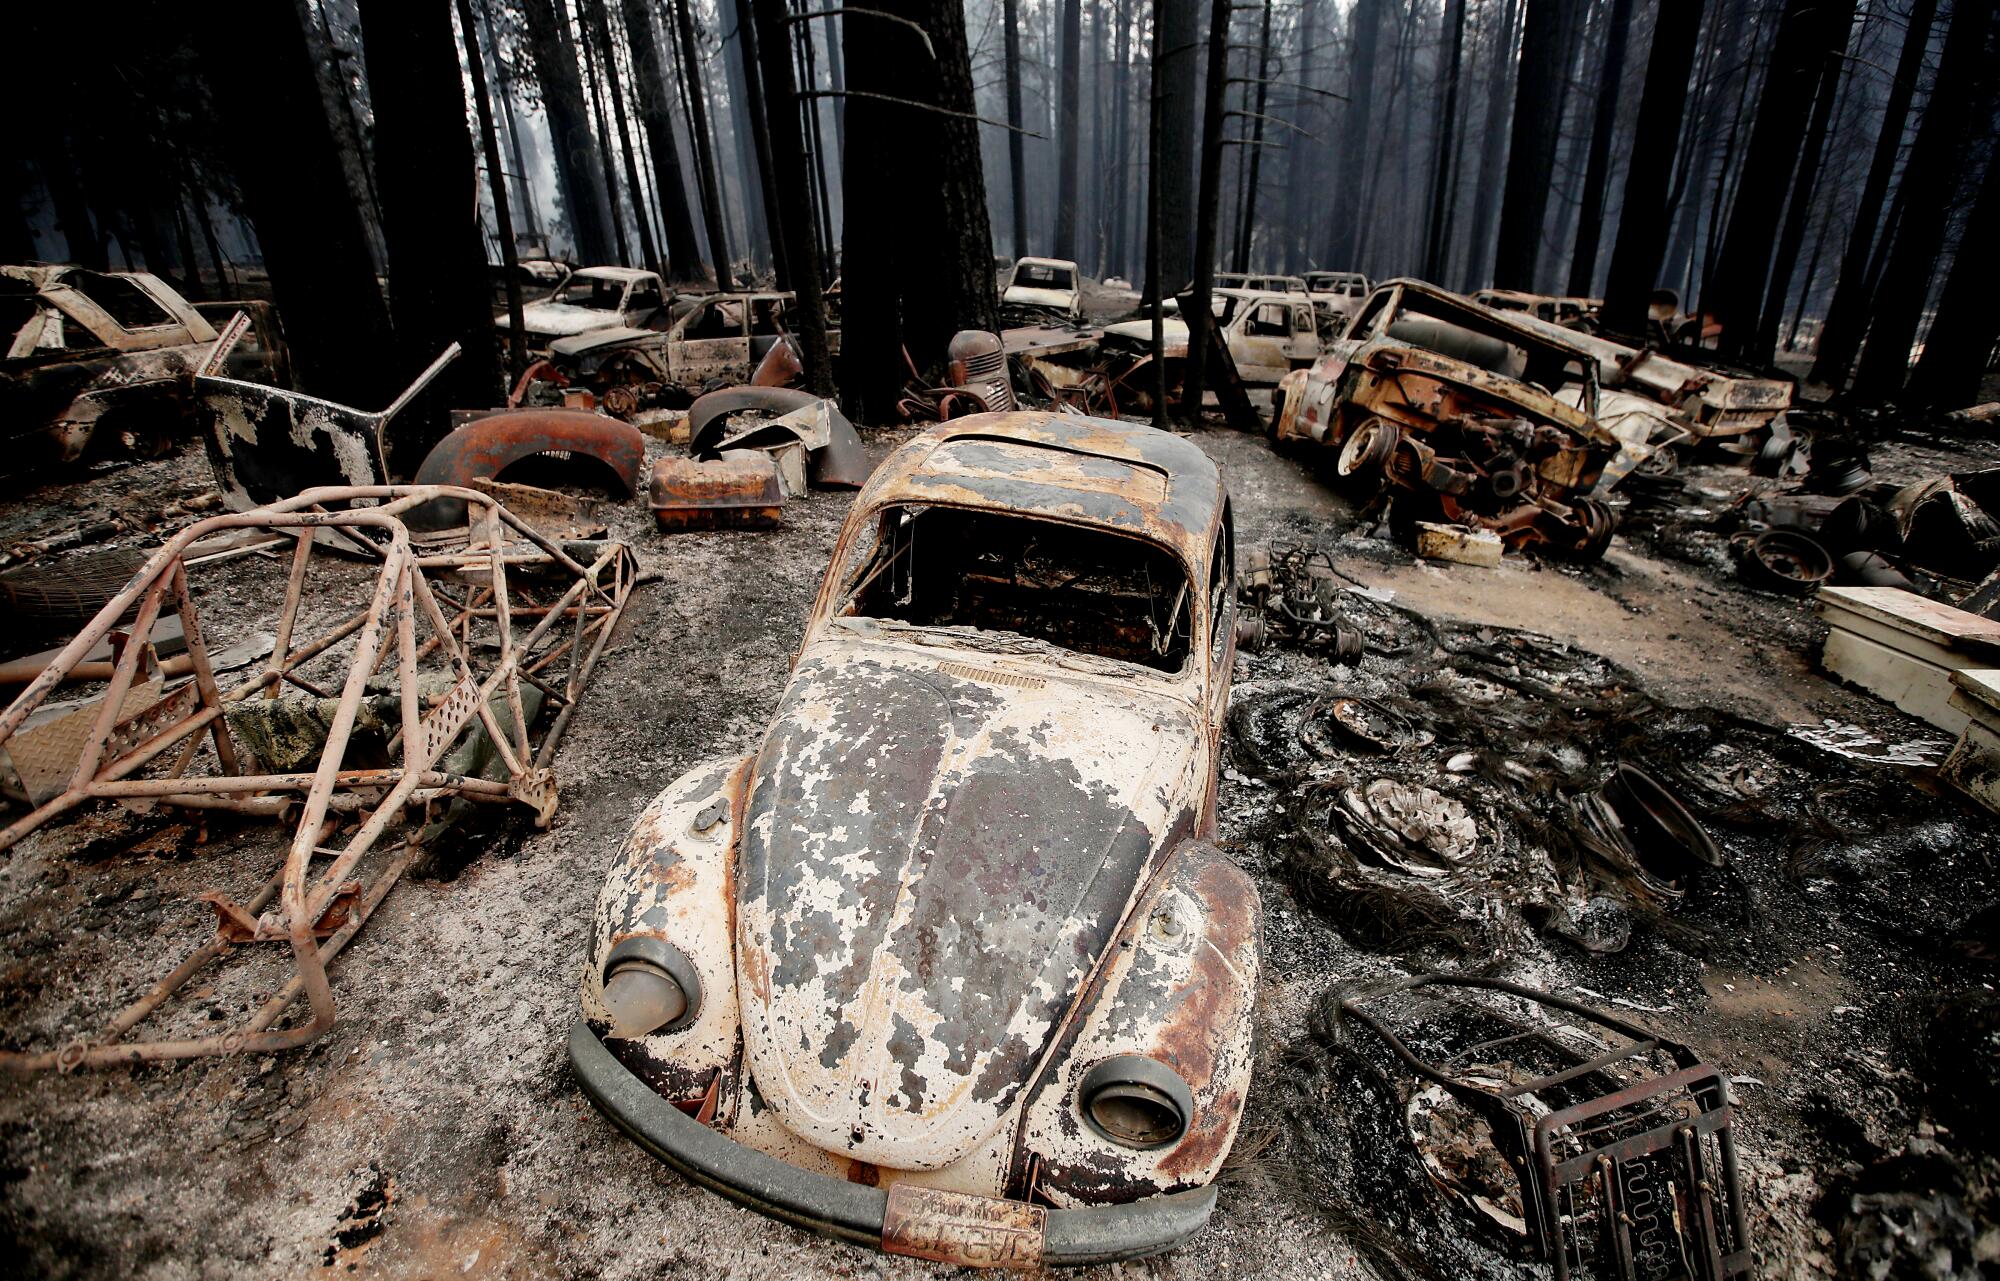 Burnt vehicles scattered among other debris from Caldor fire.